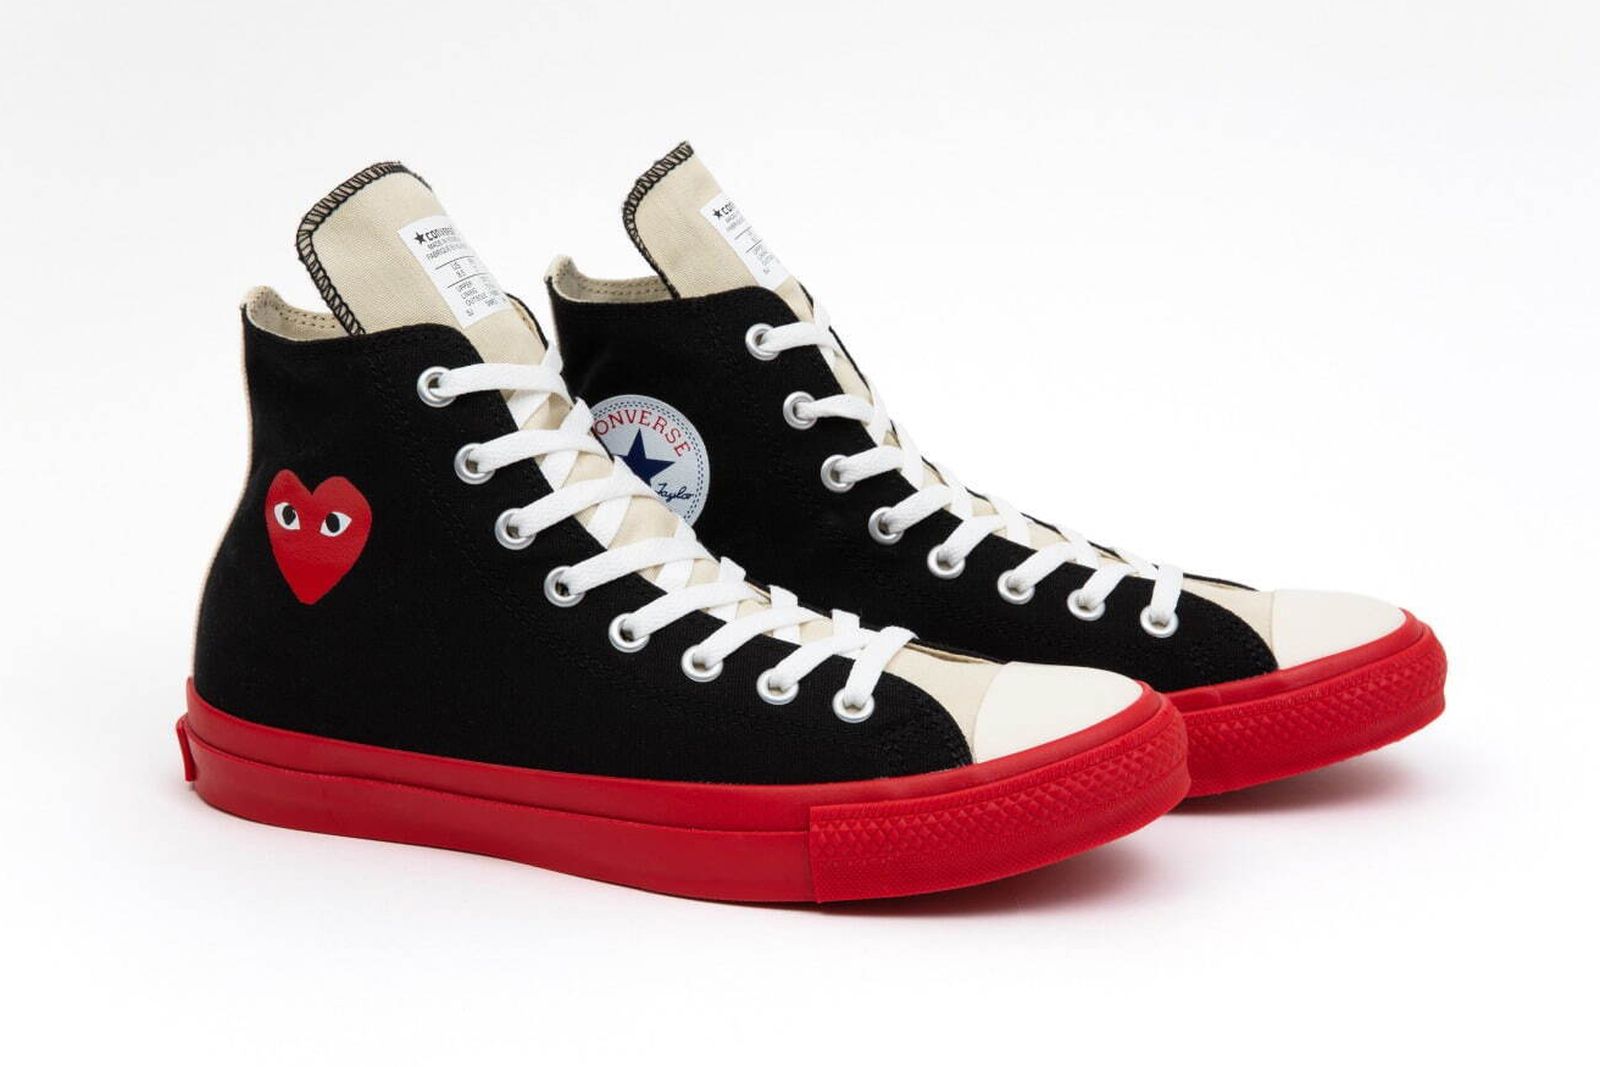 CdG Play Drop Collab Sneakers: Release Date